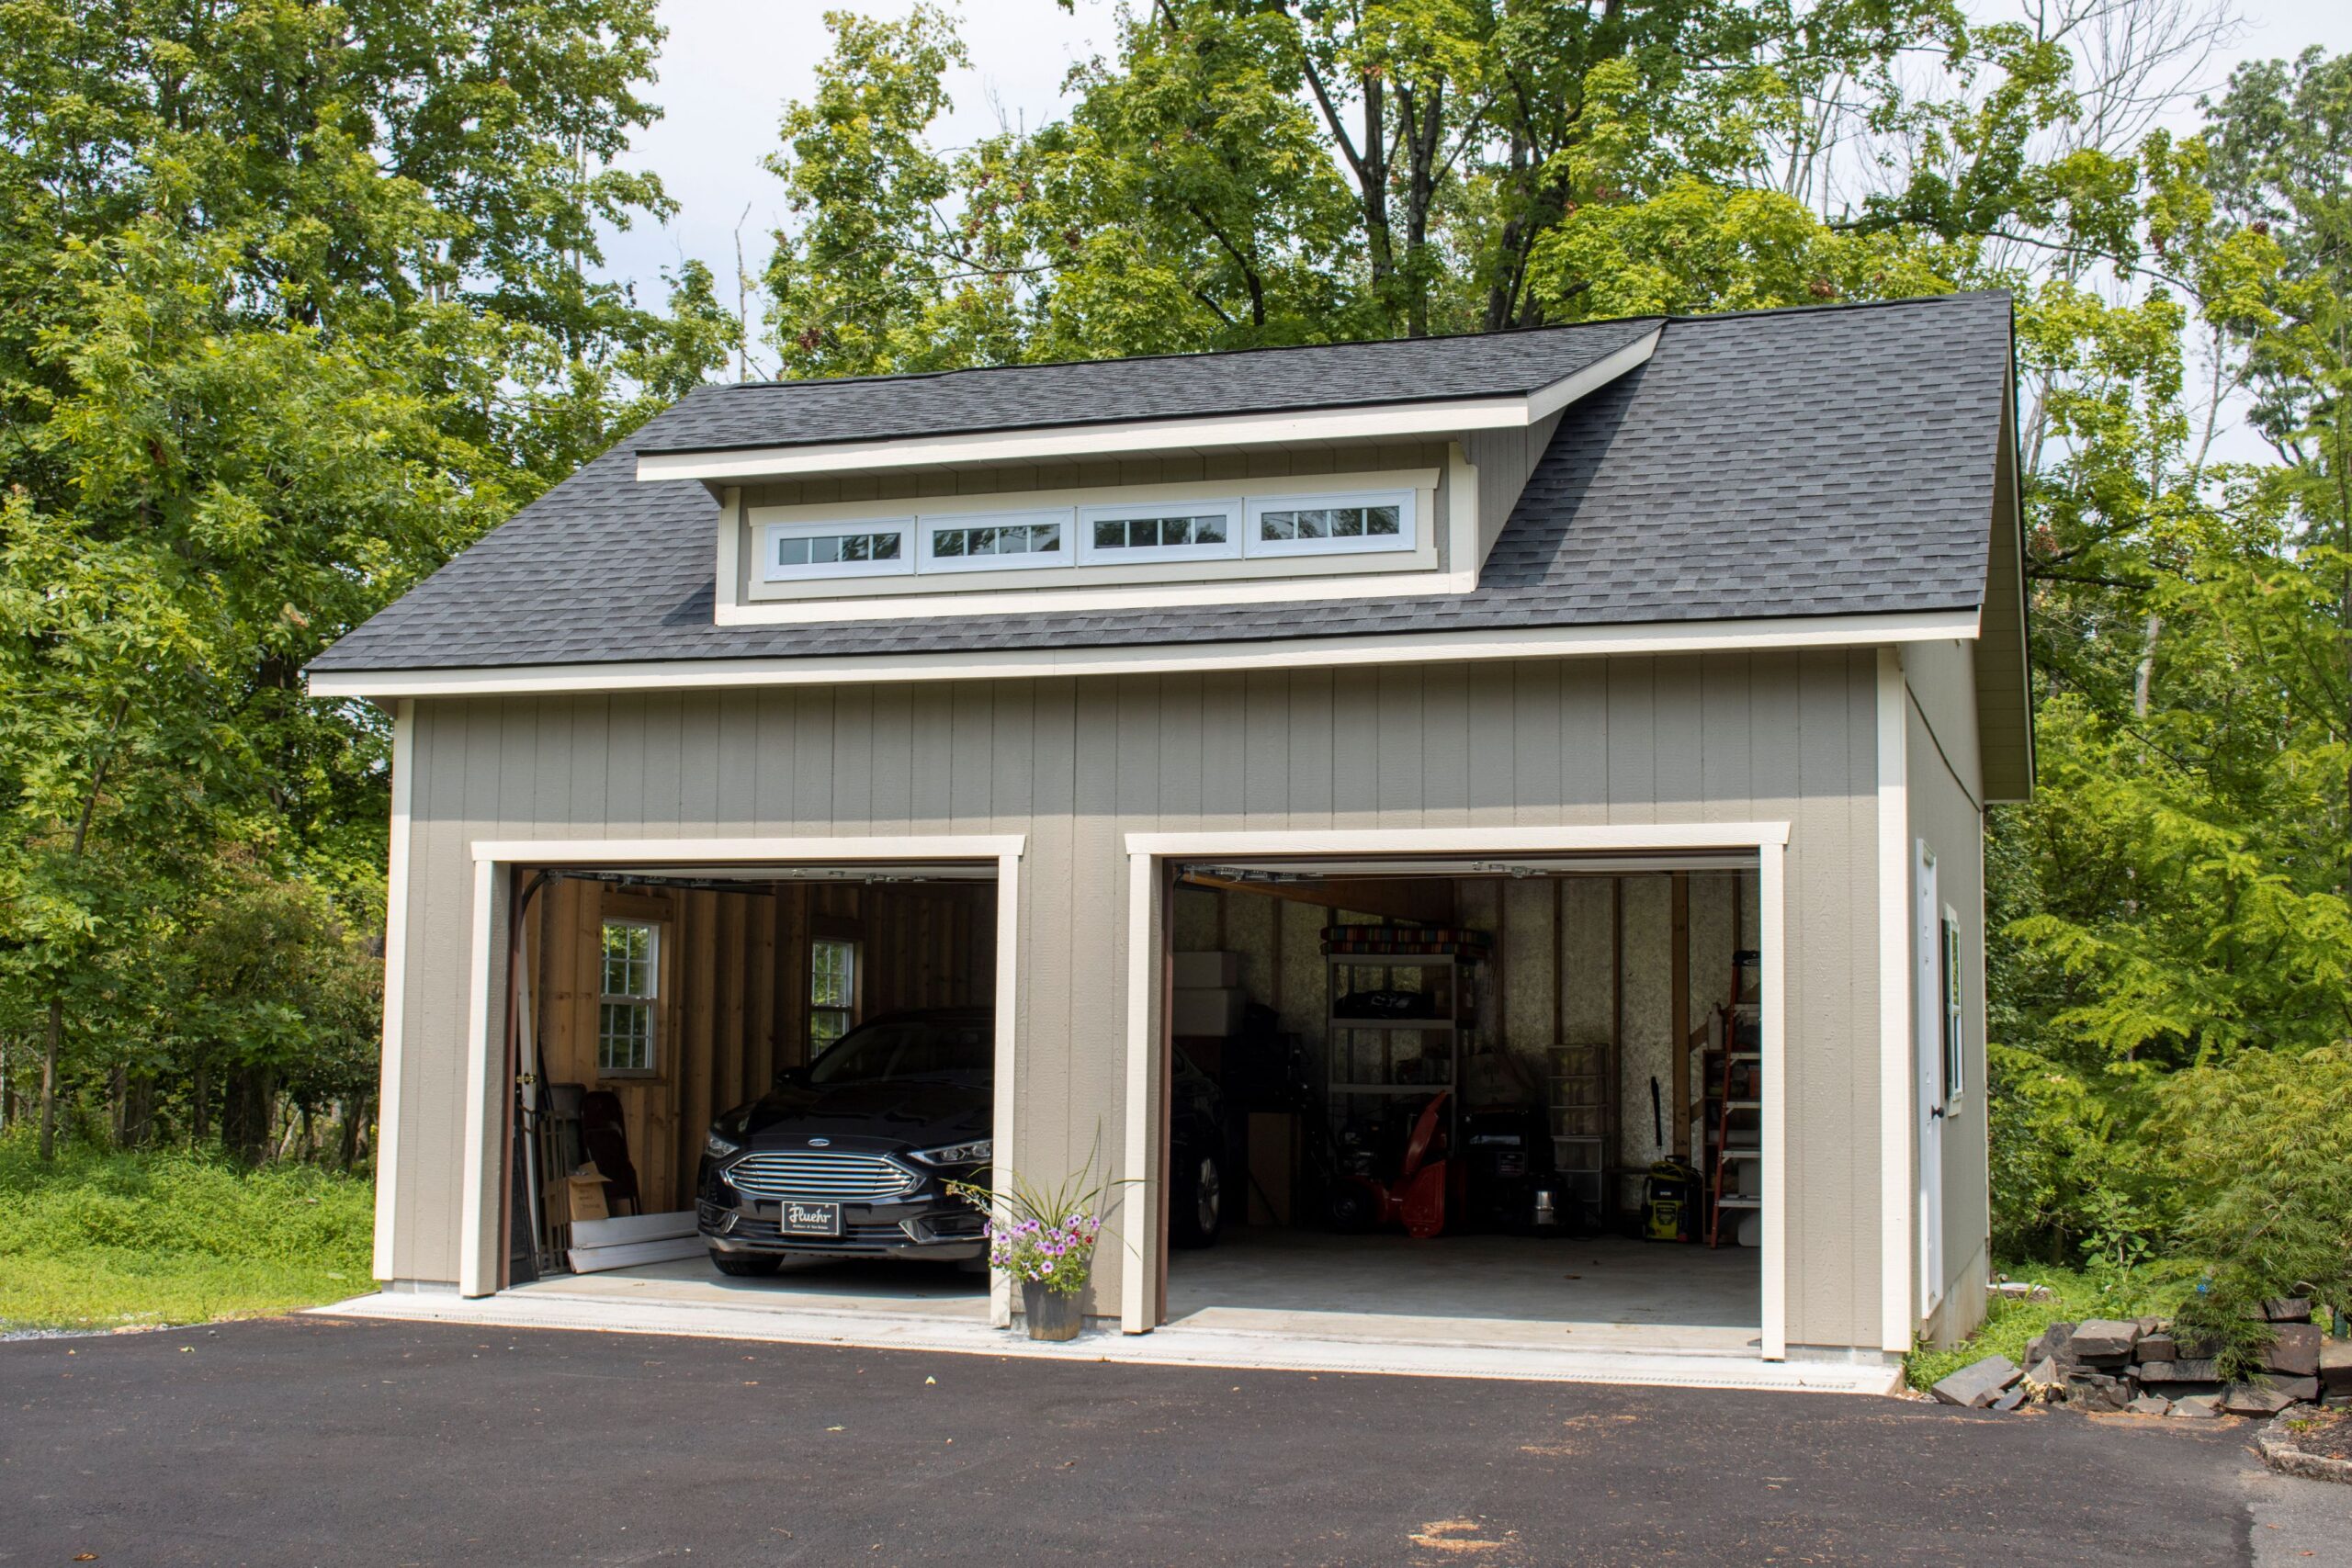 Exterior of a 2-story, 2-car Garden Shed Garage with gray siding.